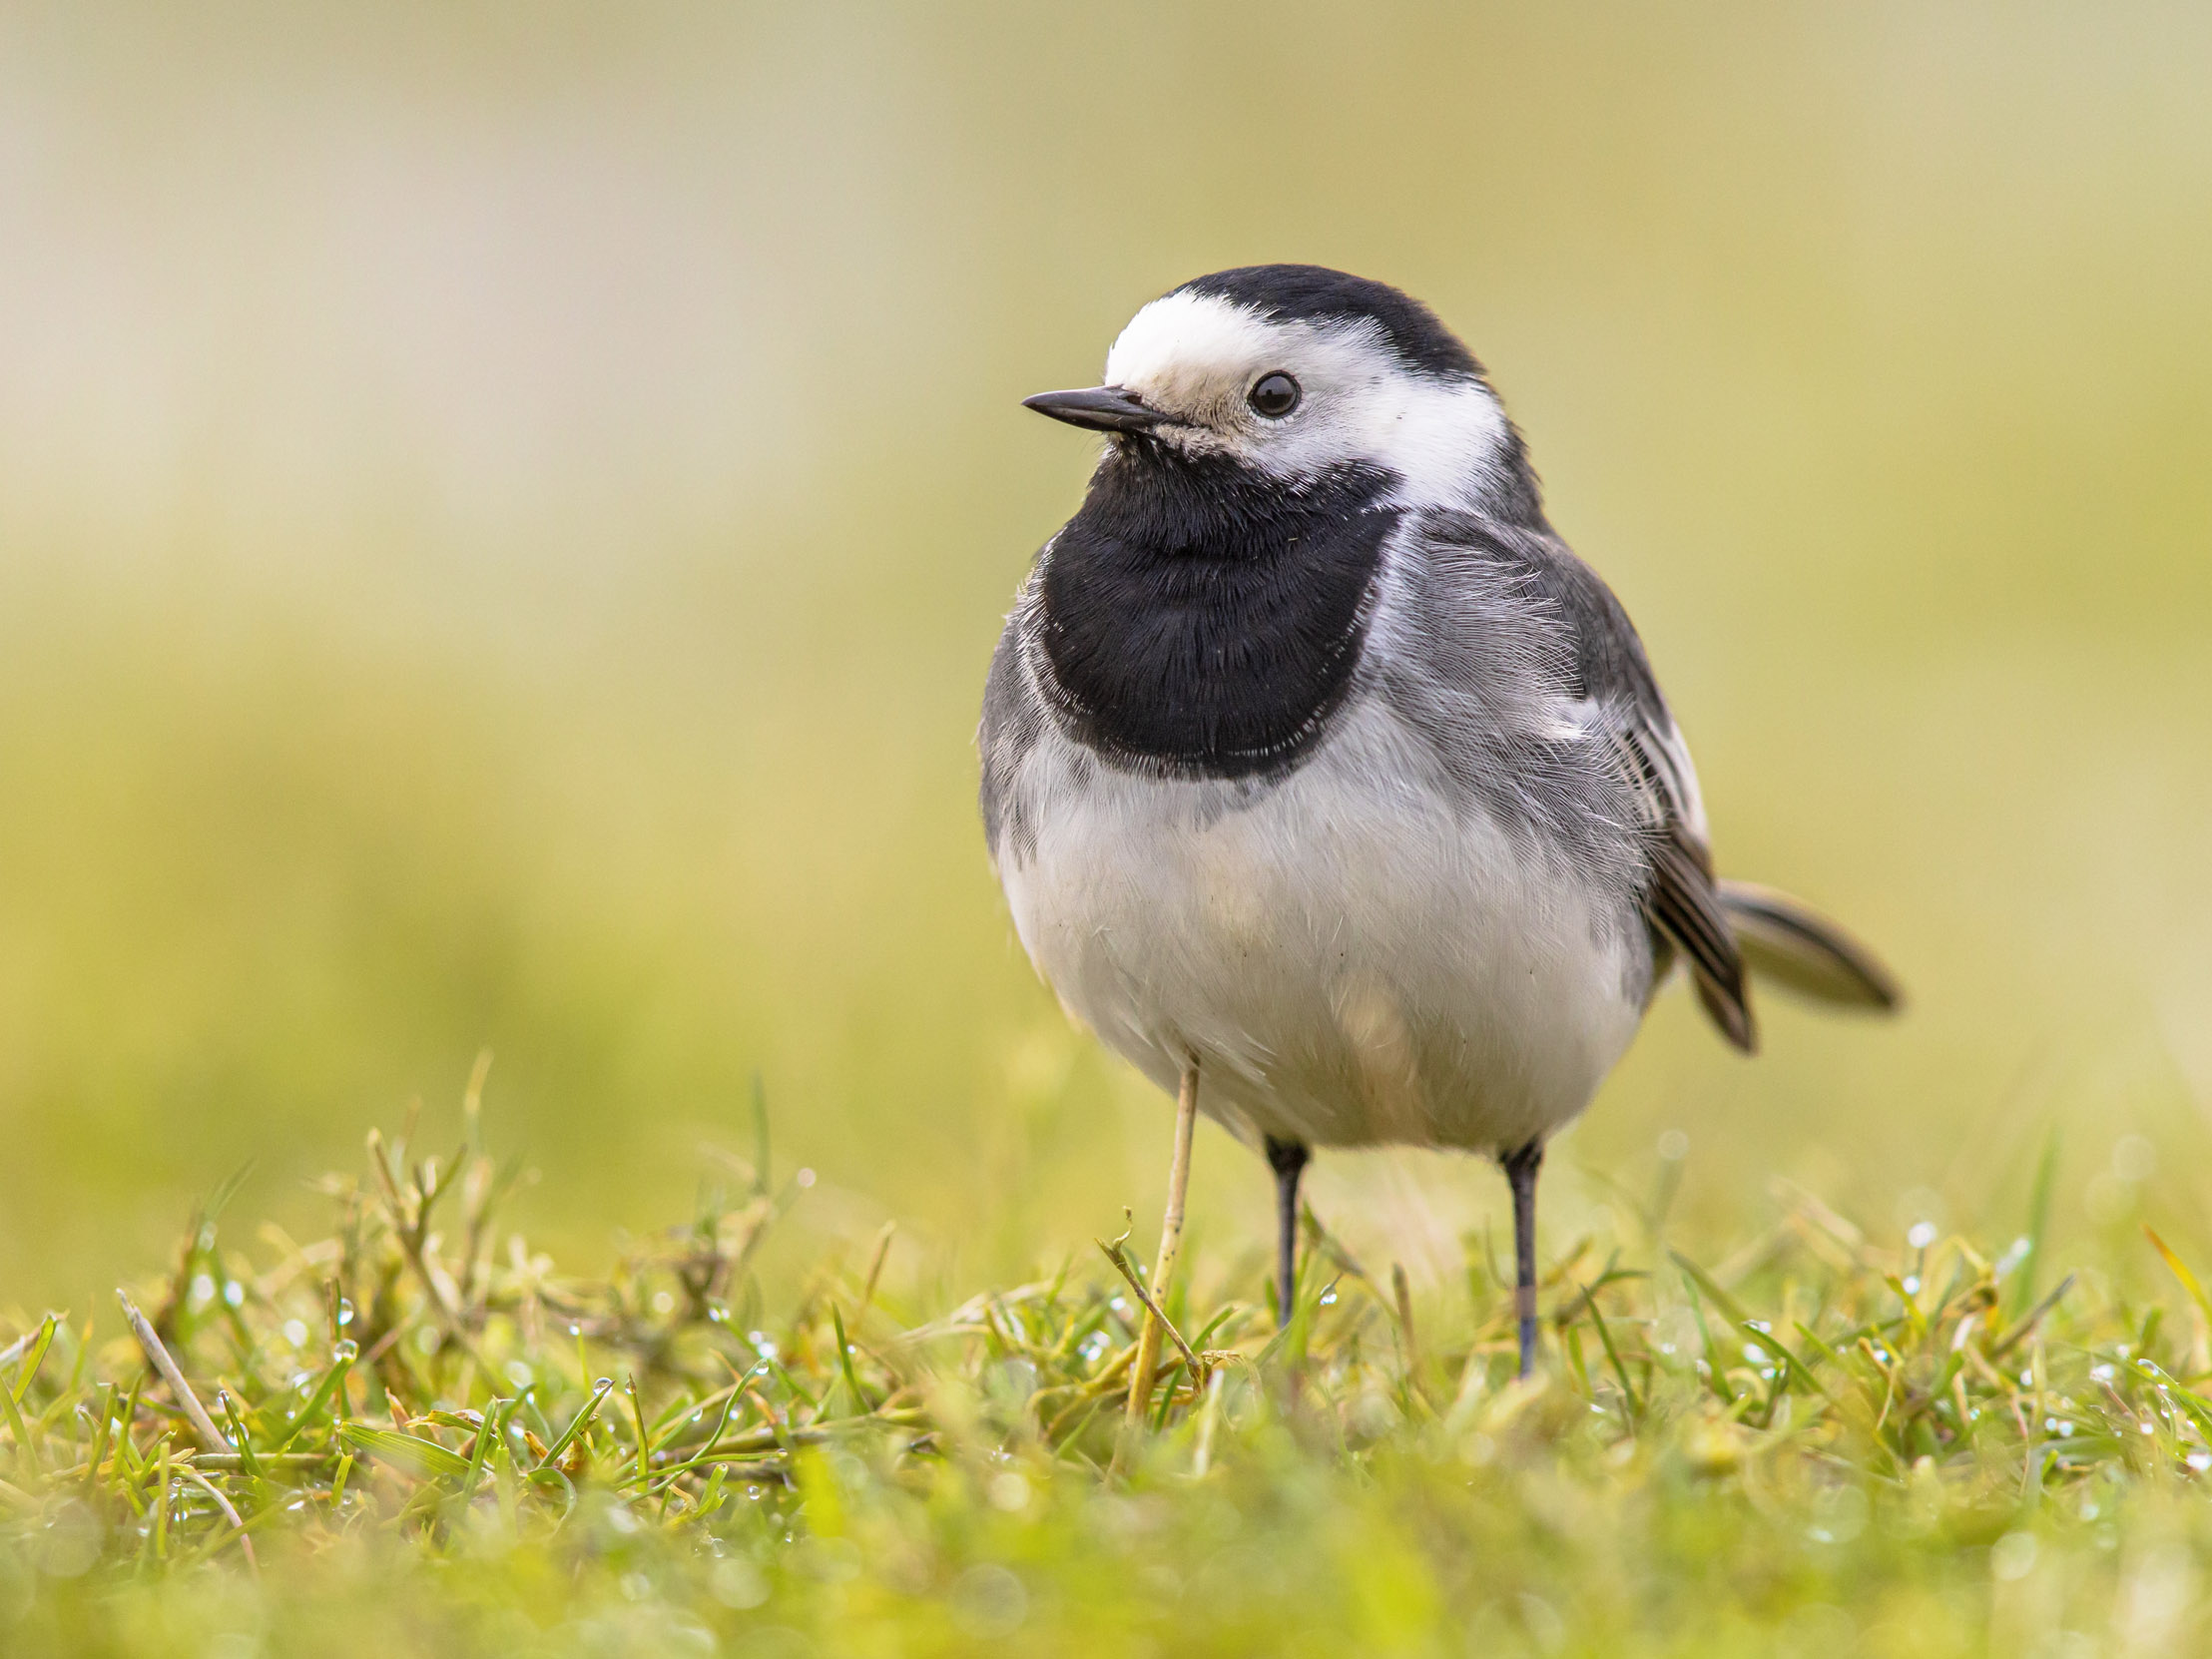 A lone Pied Wagtail stood on a mossy bed.